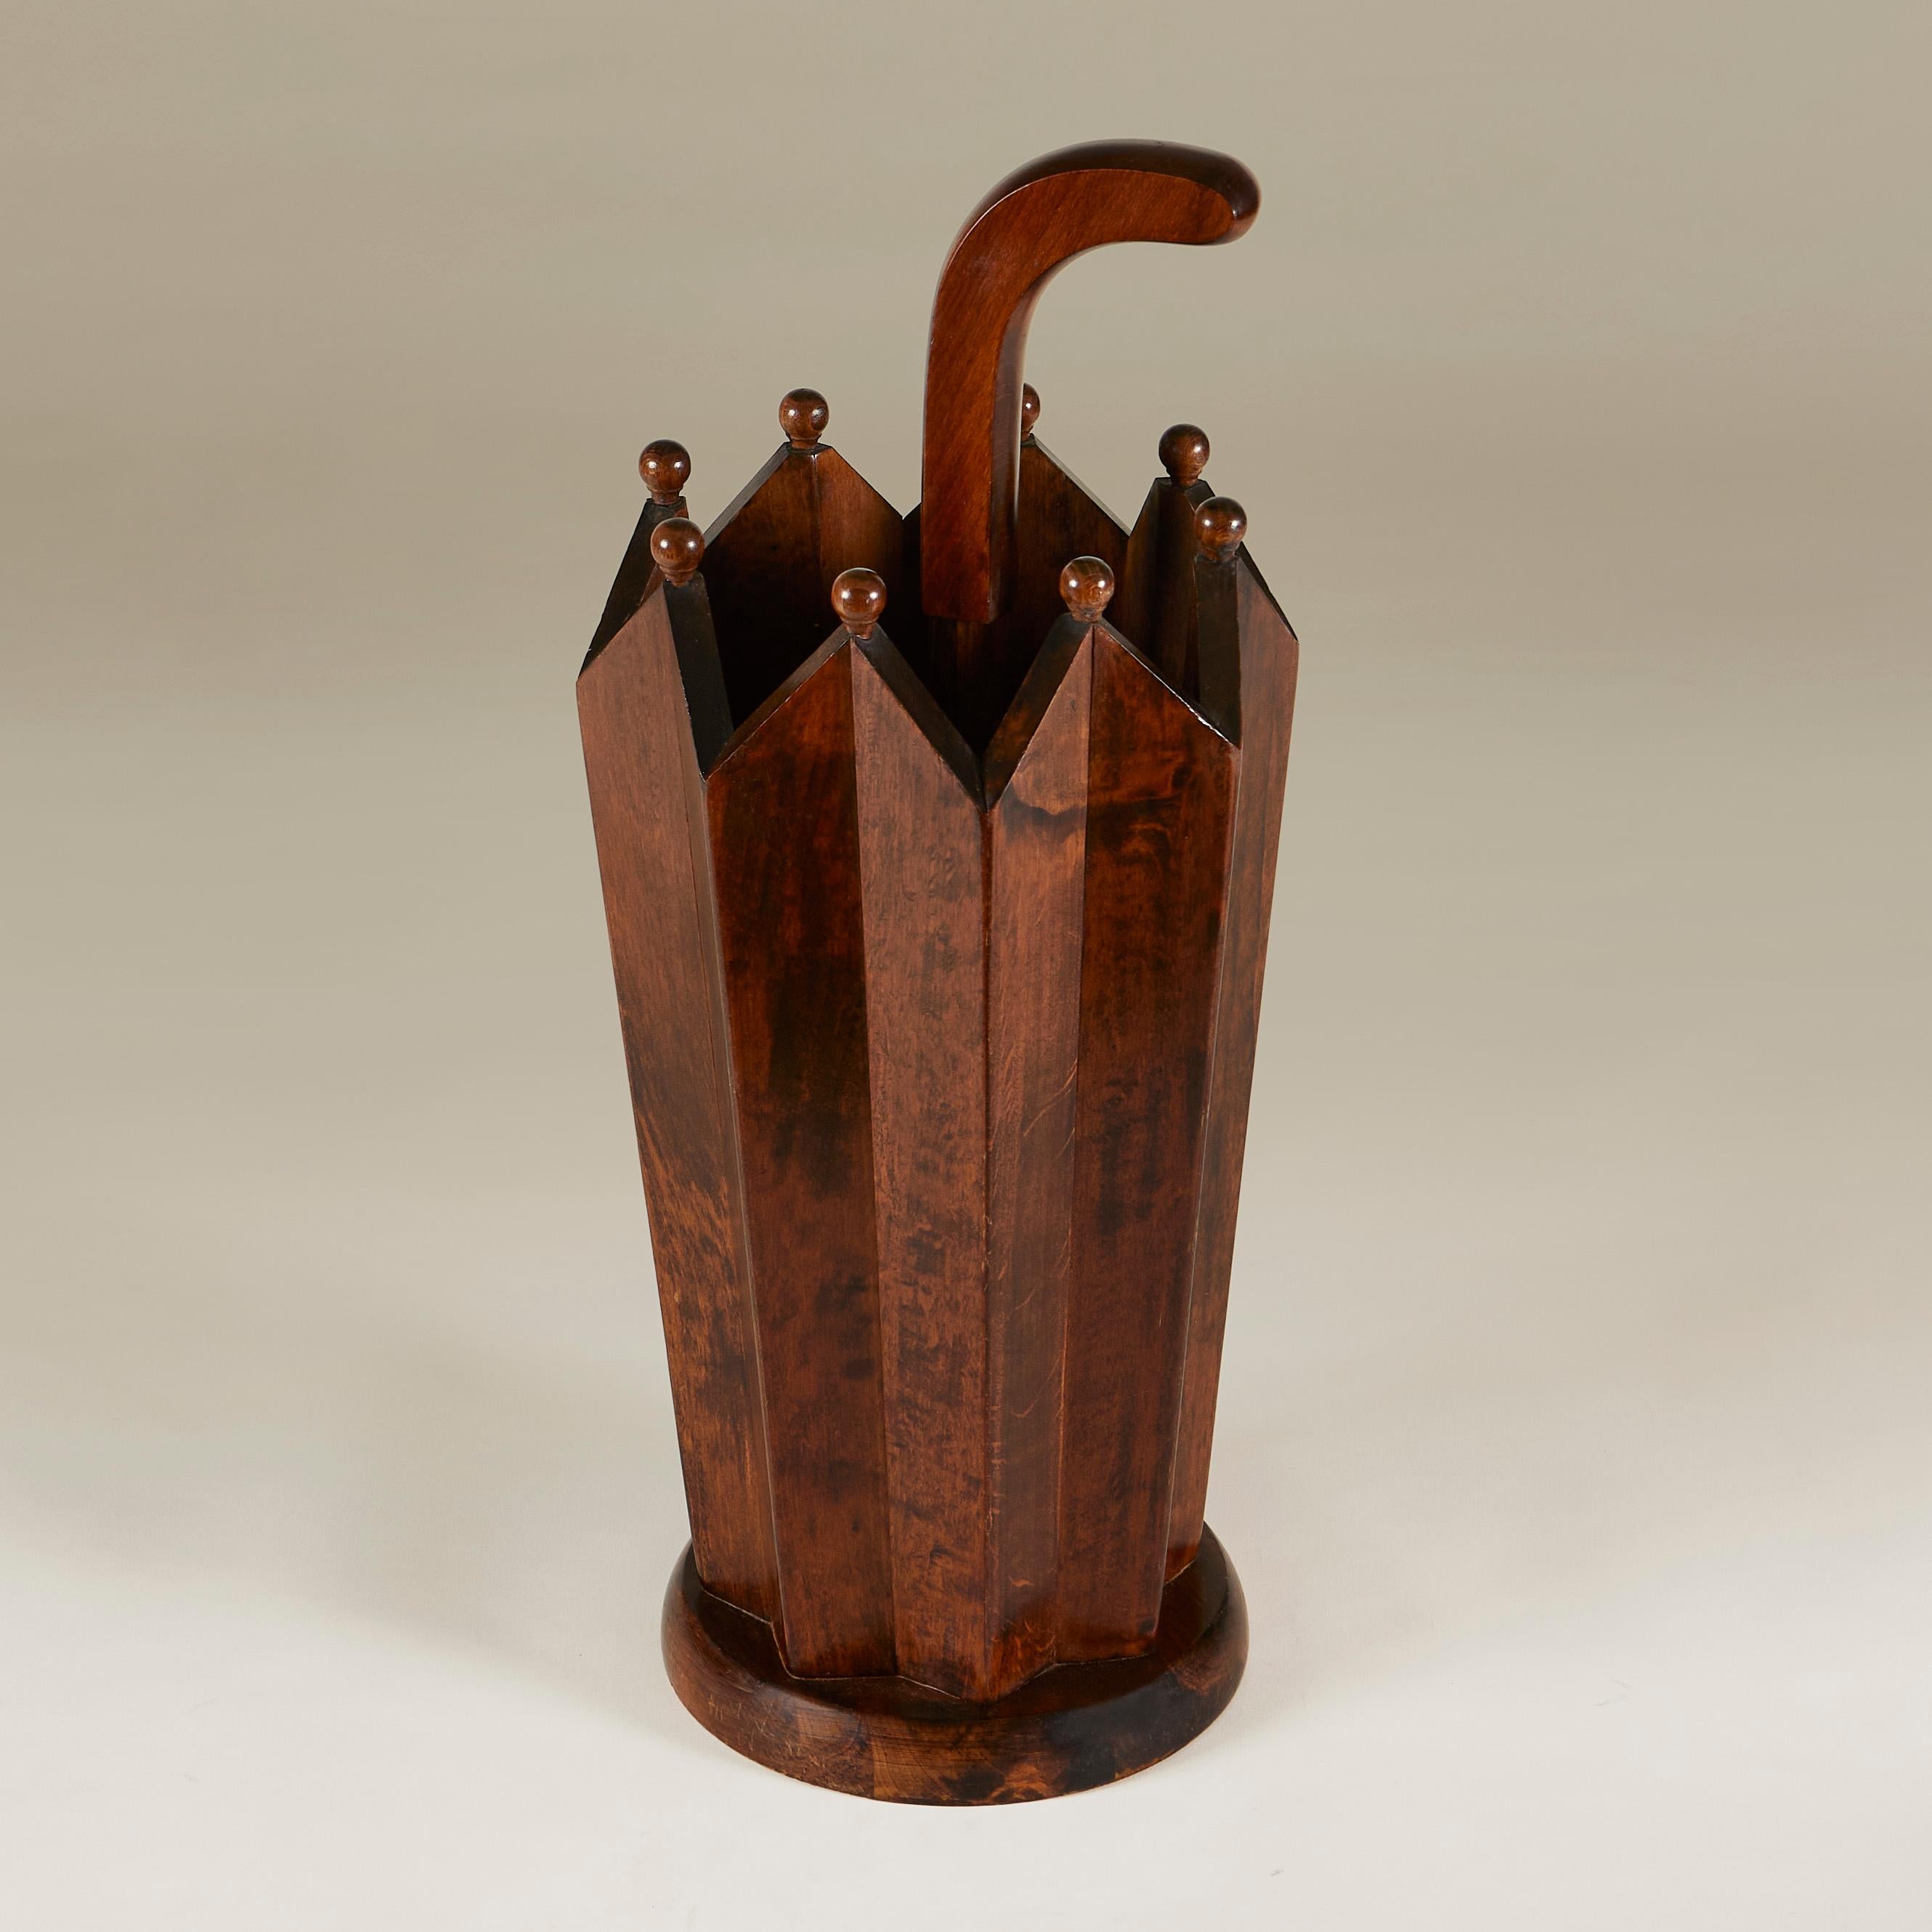 The clue is in the shape! Dark wooden umbrella stand shaped like an umbrella.